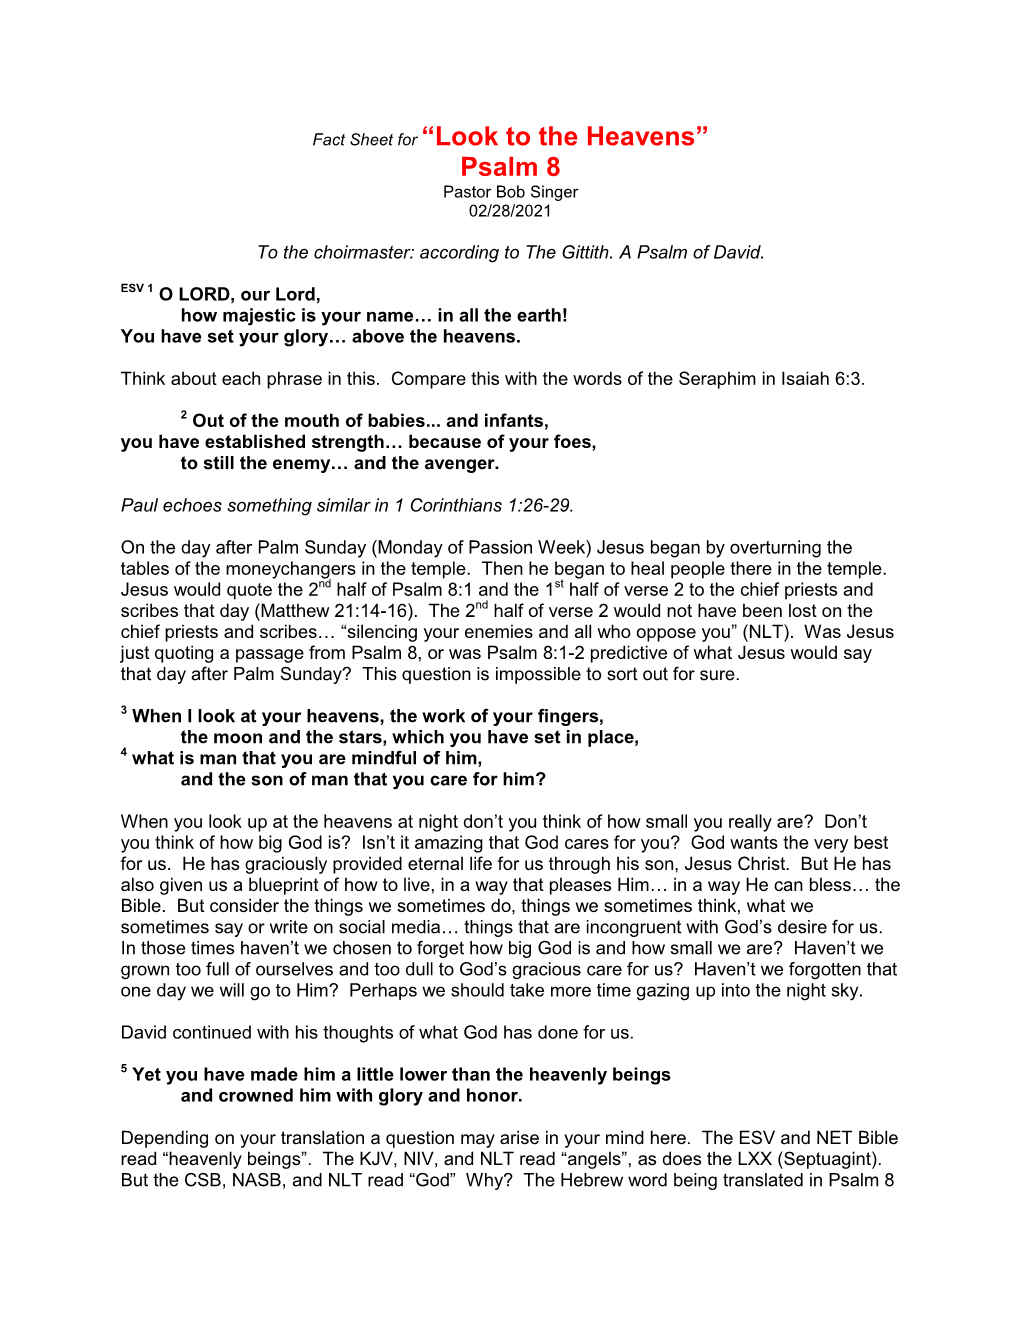 Fact Sheet for “Look to the Heavens” Psalm 8 Pastor Bob Singer 02/28/2021